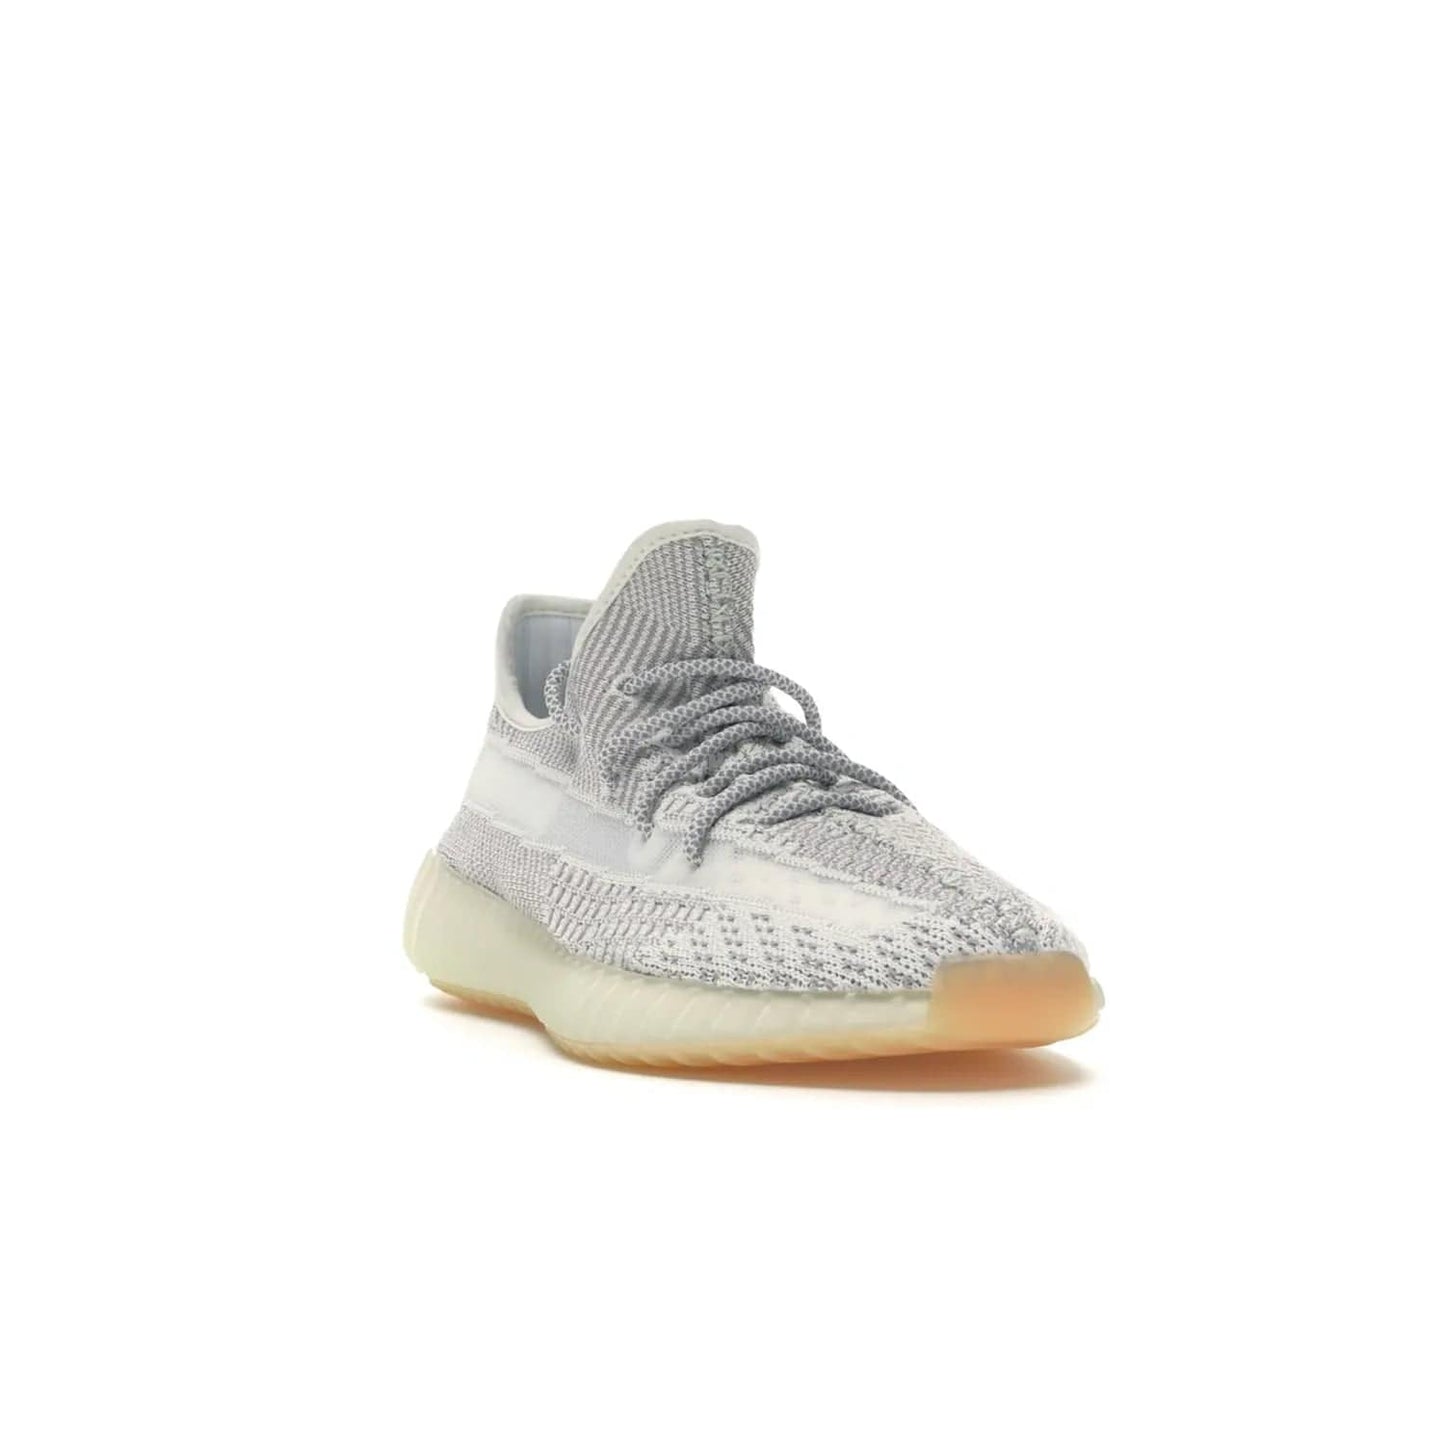 adidas Yeezy Boost 350 V2 Yeshaya (Non-Reflective) - Image 7 - Only at www.BallersClubKickz.com - Step out in style with the adidas Yeezy Boost 350 V2 Yeshaya (Non-Reflective). Gray-and-white Primeknit upper with mesh side stripe & rope laces, plus a translucent Boost sole with a hint of yellow. Make a statement and feel comfortable with this stylish sneaker.